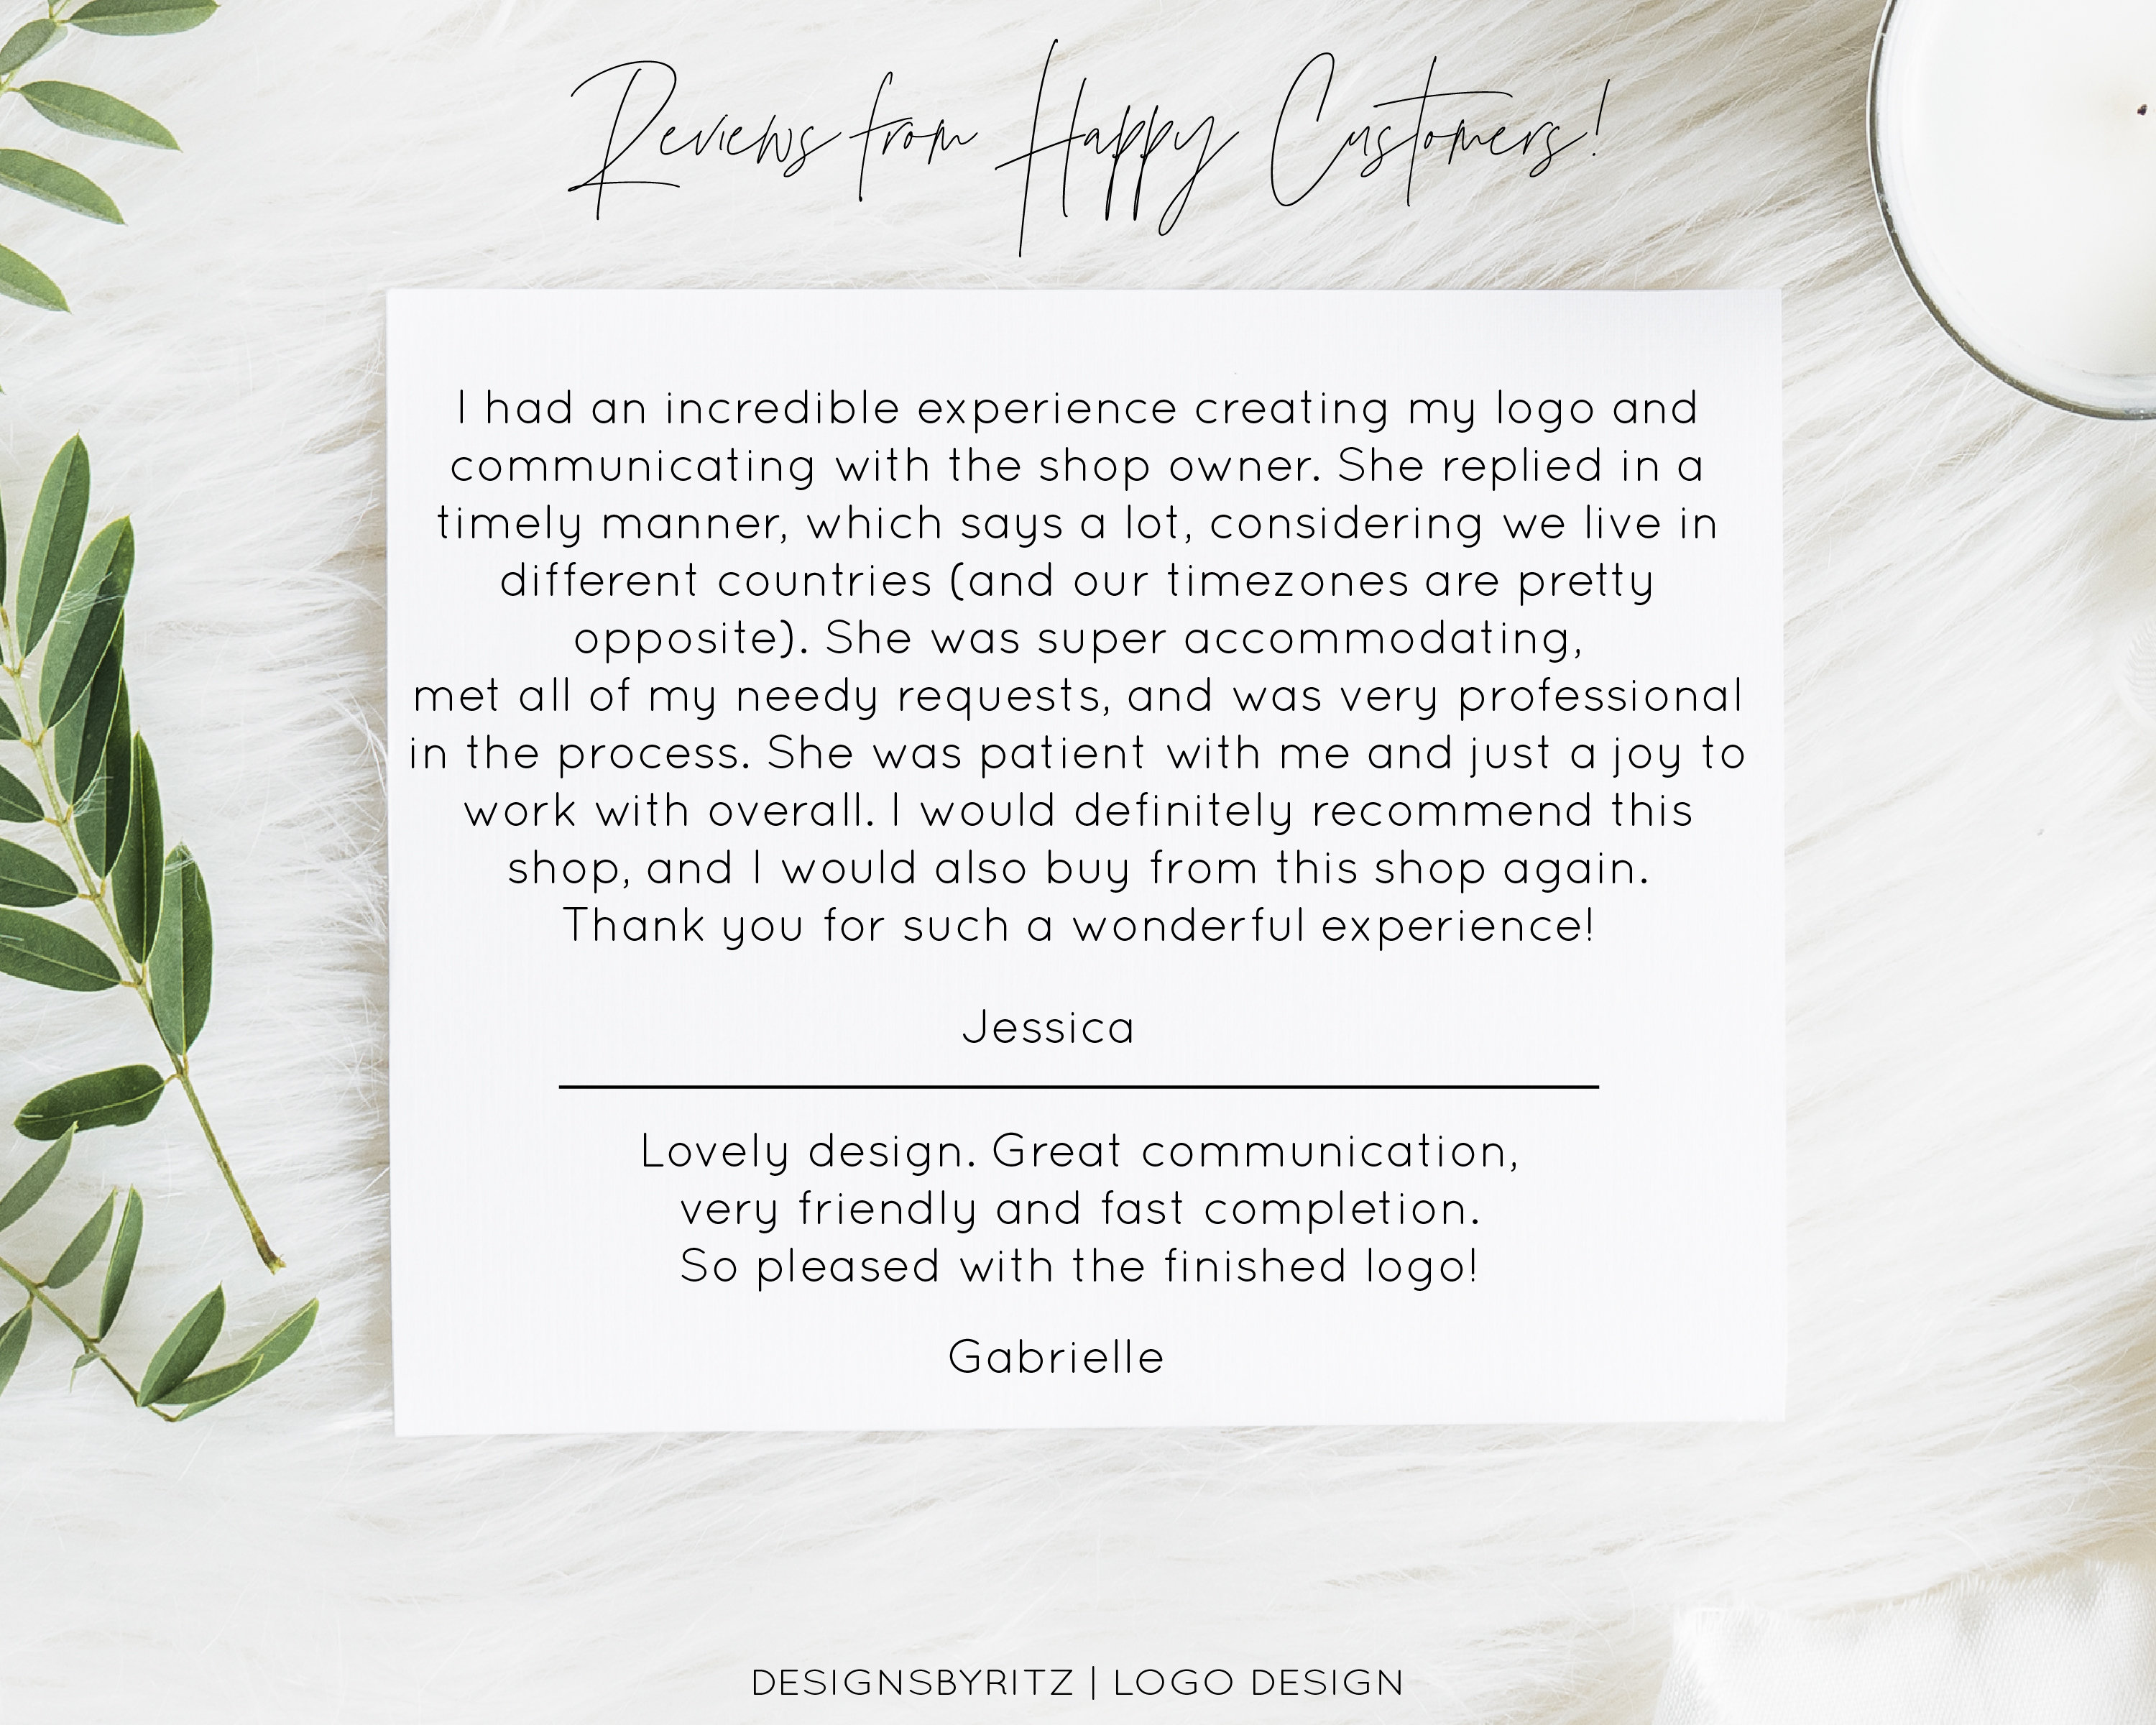 Beauty Logo Design: Mastering the Elements of Aesthetic Excellence -  GraphicSprings